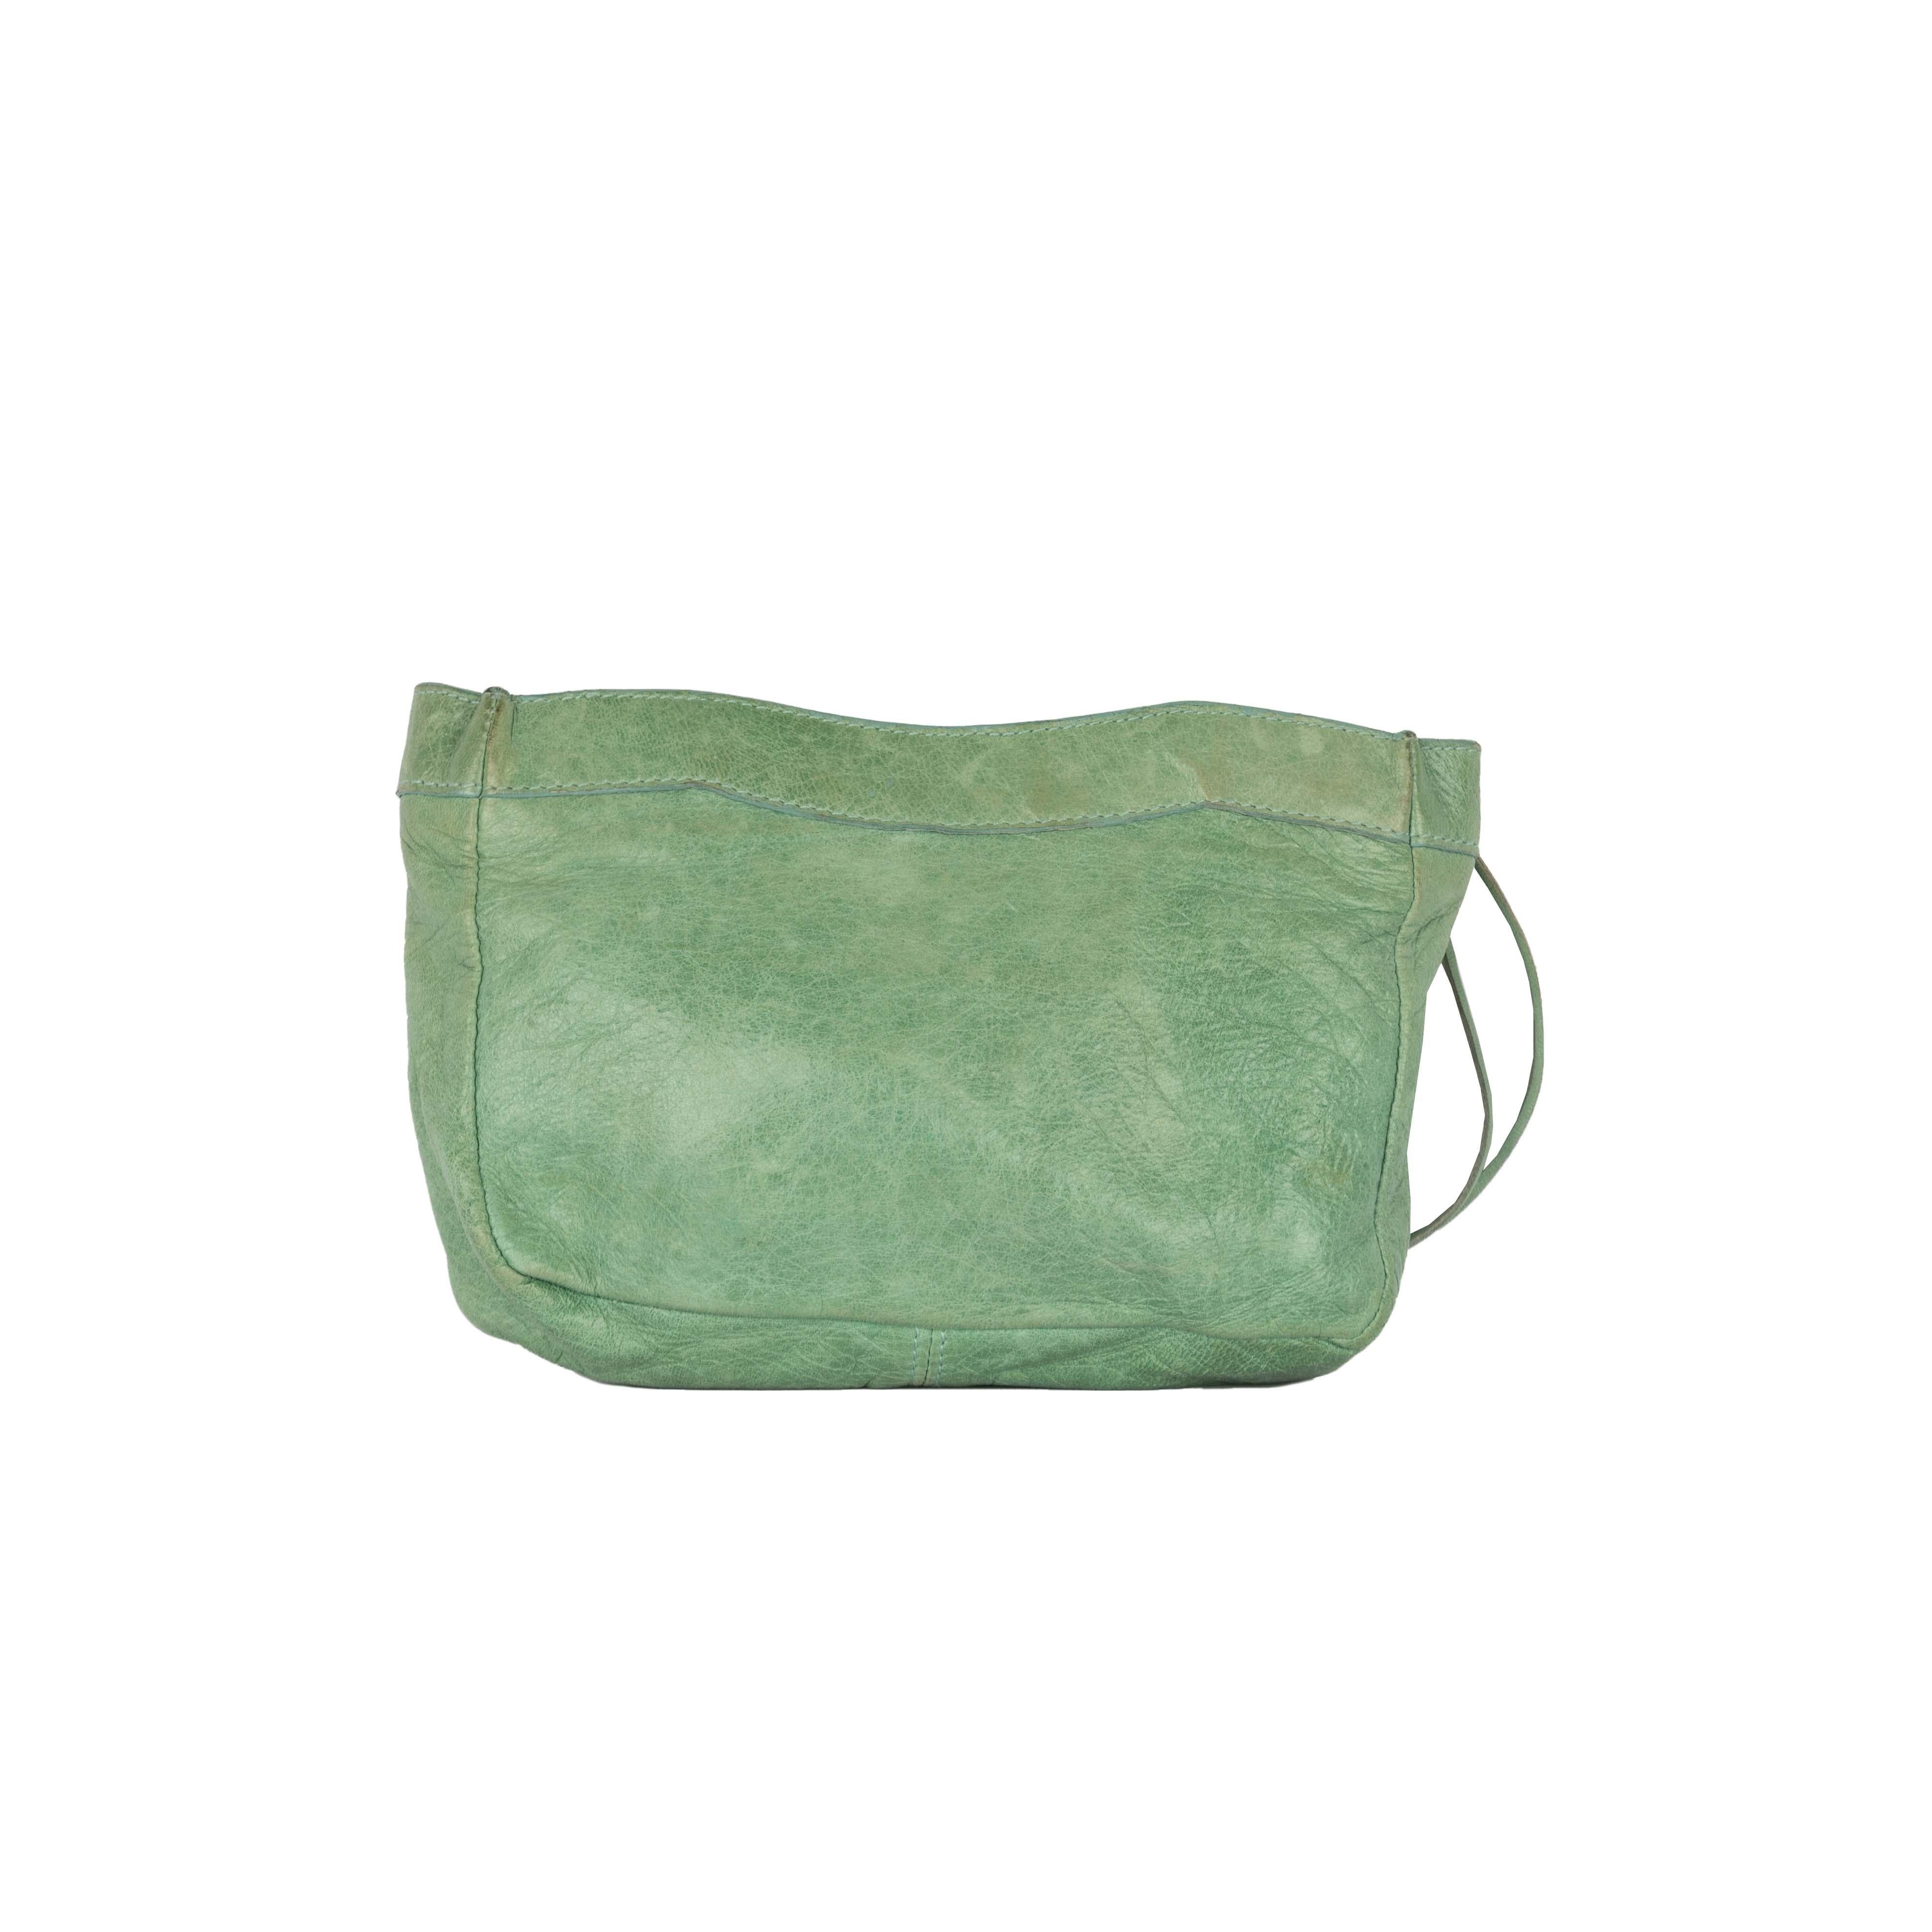 Made with lambskin leather, the Balenciaga Moto City Green Clutch features four studs, front zip pocket and a top zipper with the brand label stitched on the inside. The clutch shows signs of wear and tear with visible discoloration, a small stain